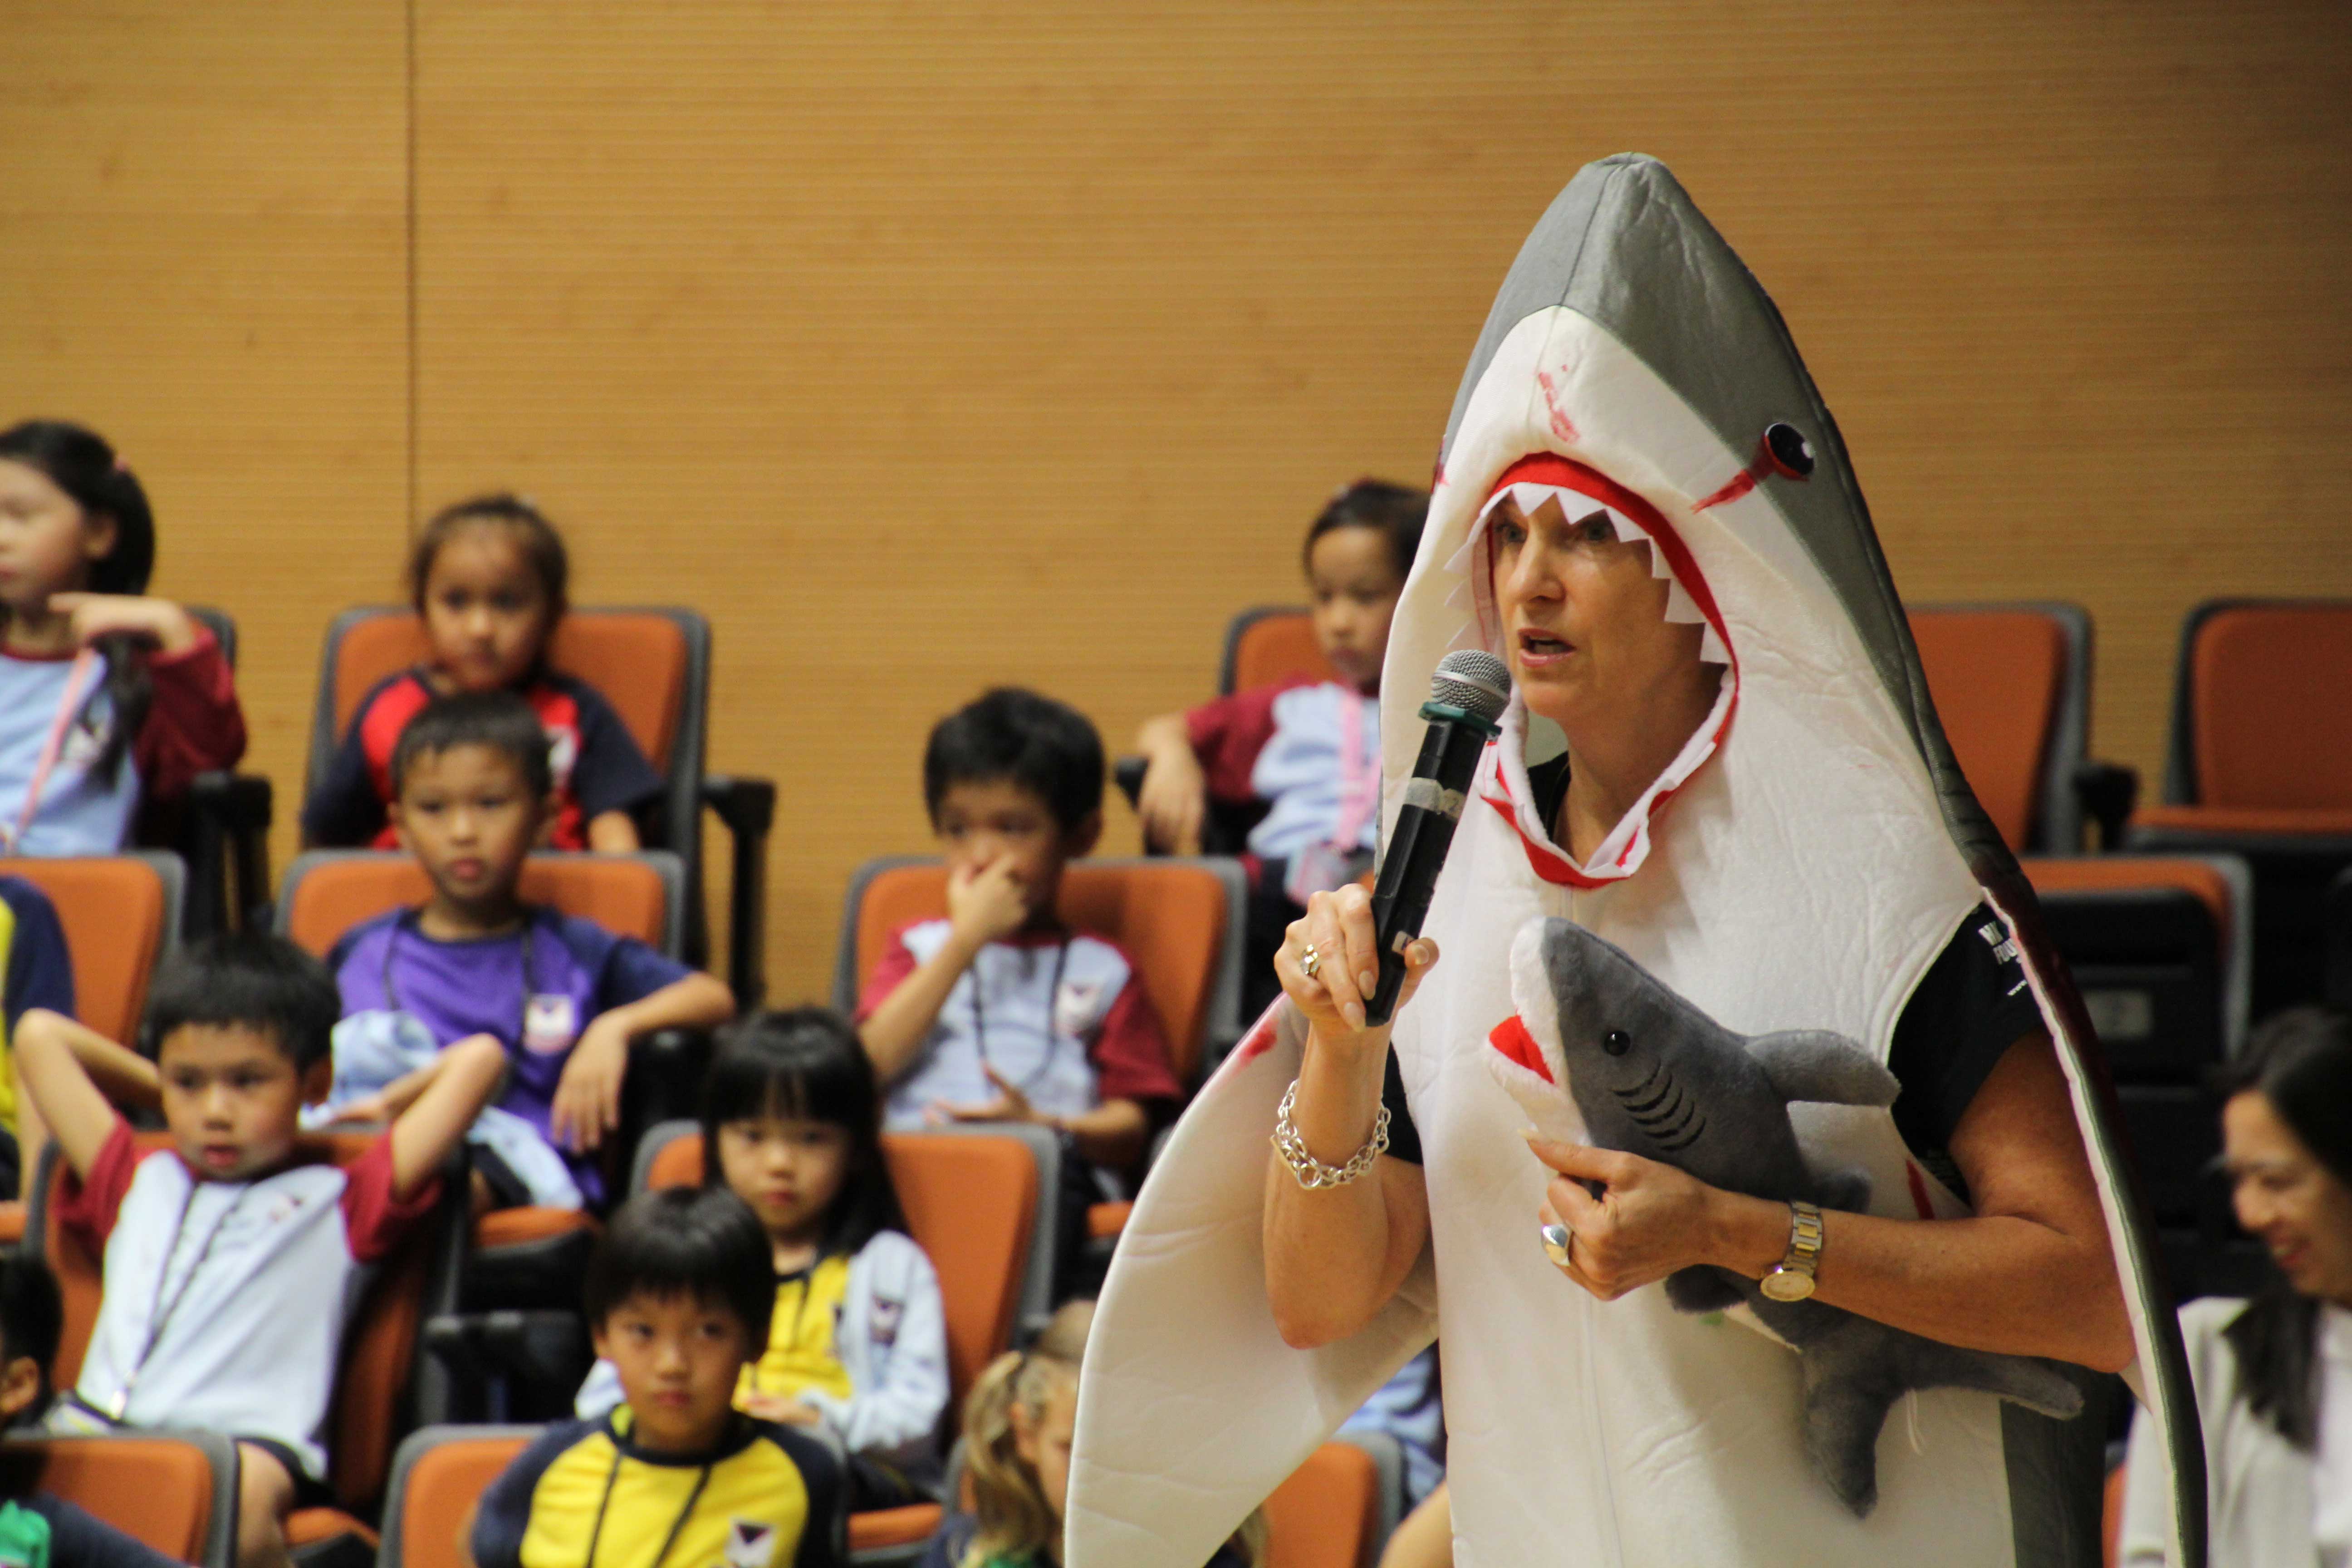 Women Dressed up in Shark Outfit Giving a Talk